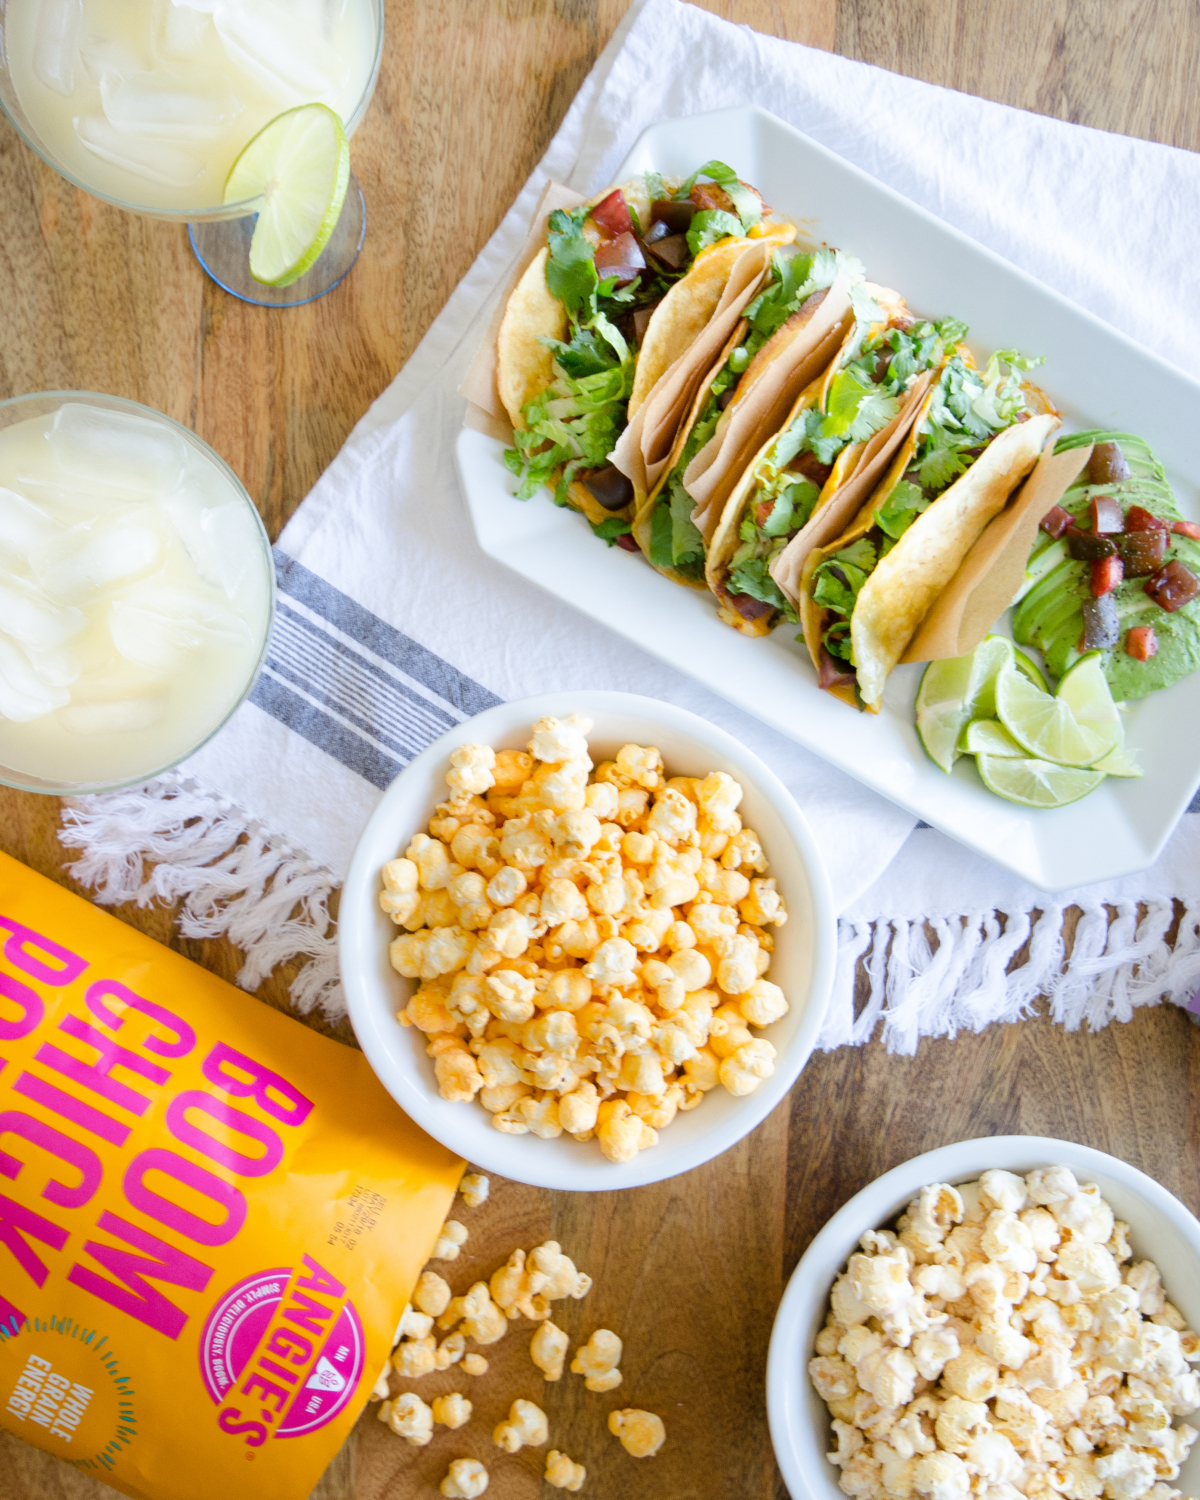 Easy Cinco de Mayo party ideas with both ready-made and do-ahead ideas. Homemade margaritas and the best homemade tacos you've ever tasted are the stars of this simple lineup.